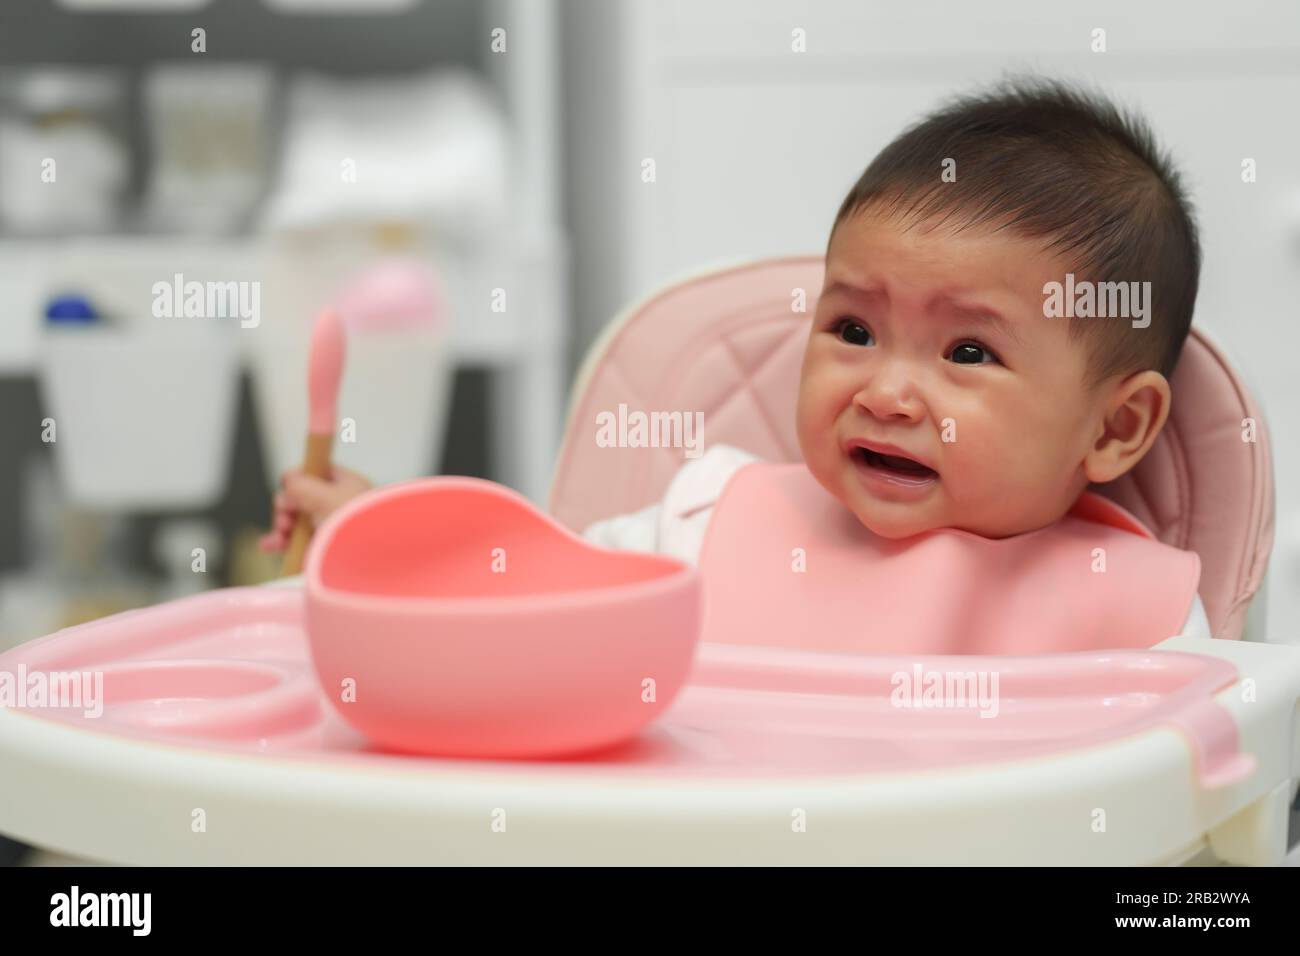 crying infant baby eating food with a spoon at home Stock Photo